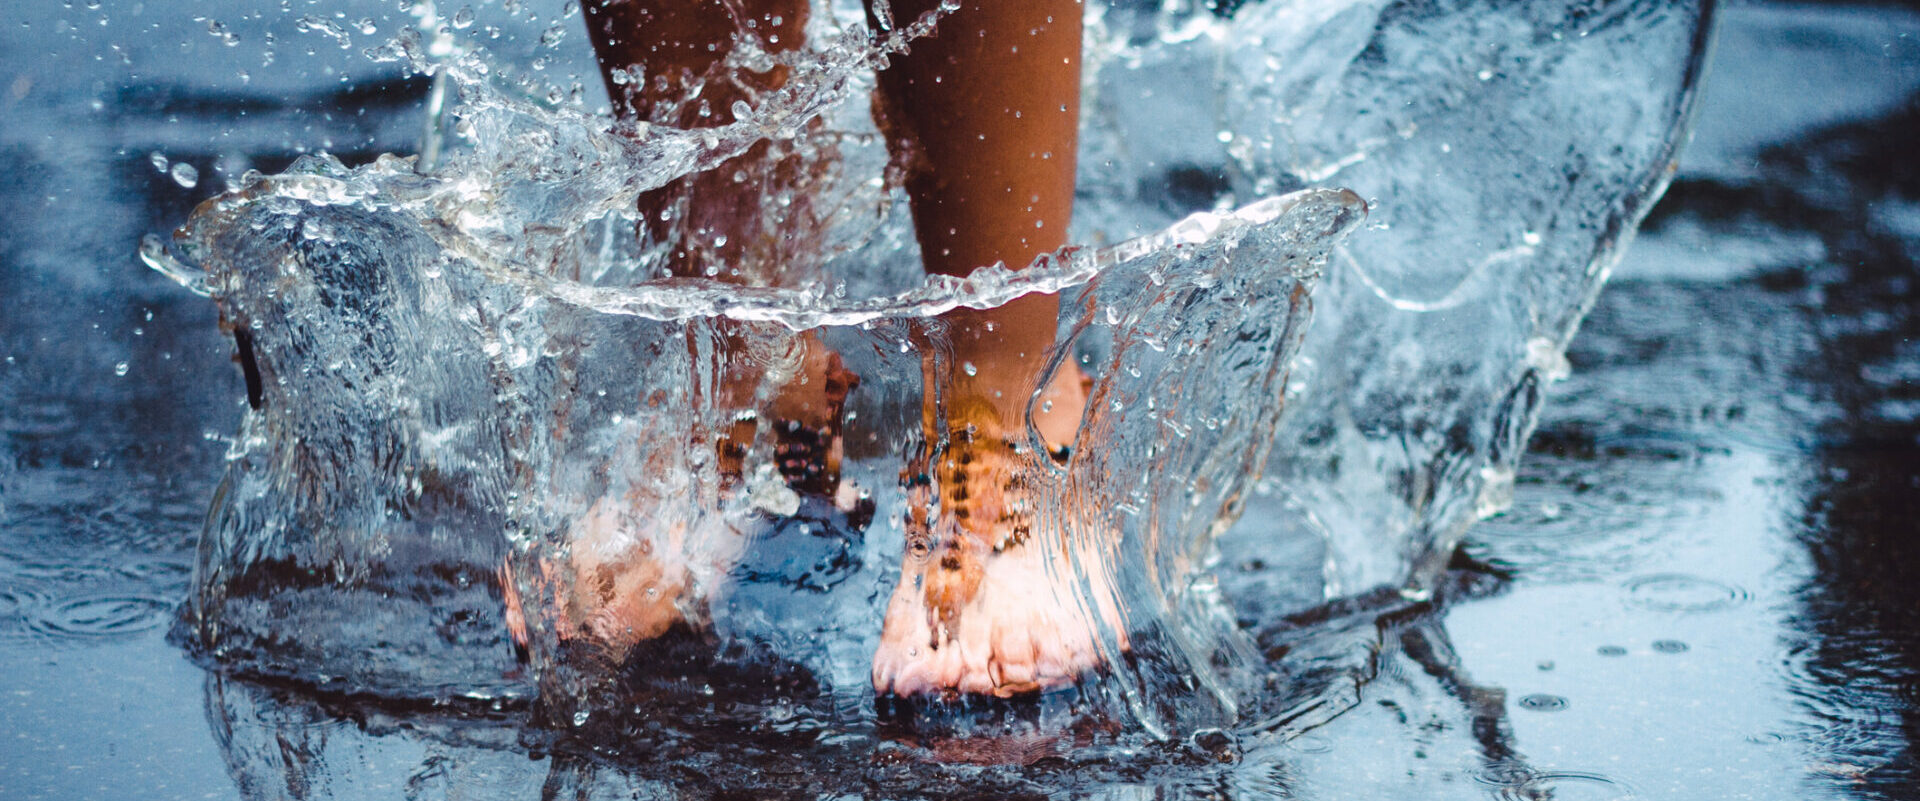 Feet jumping in water.